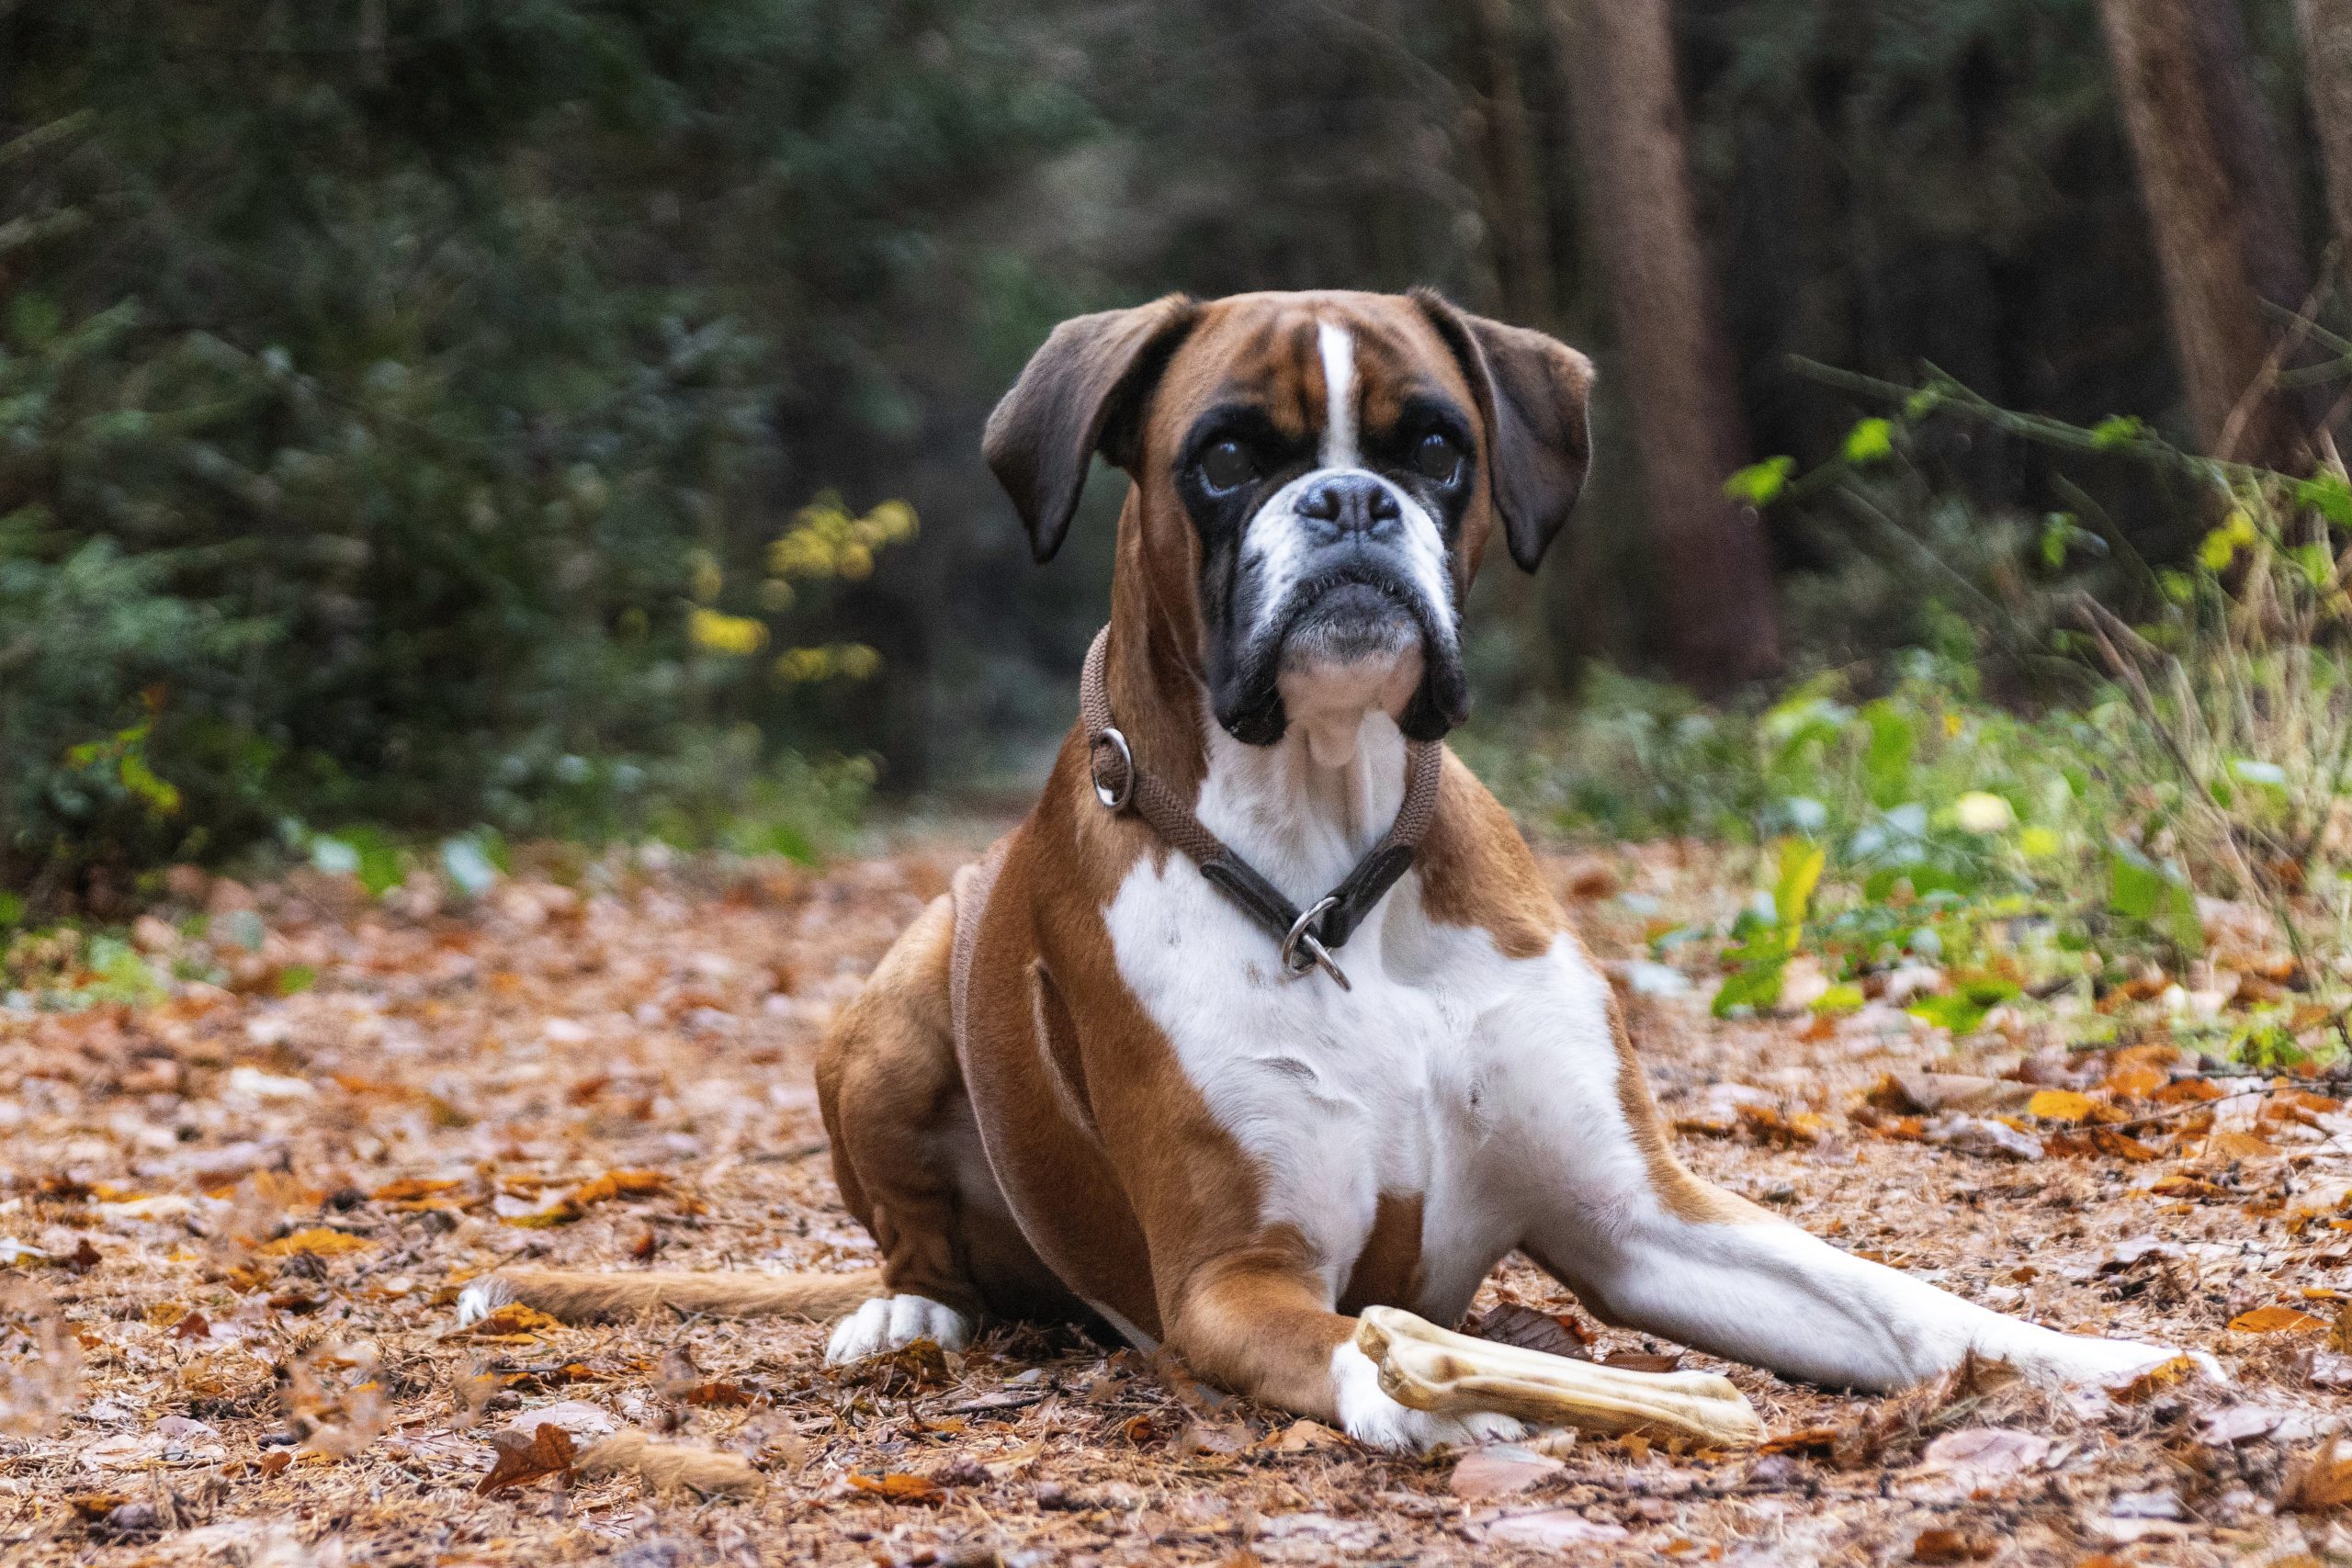 The dogbreed Boxer enjoying a nice walk through a forest